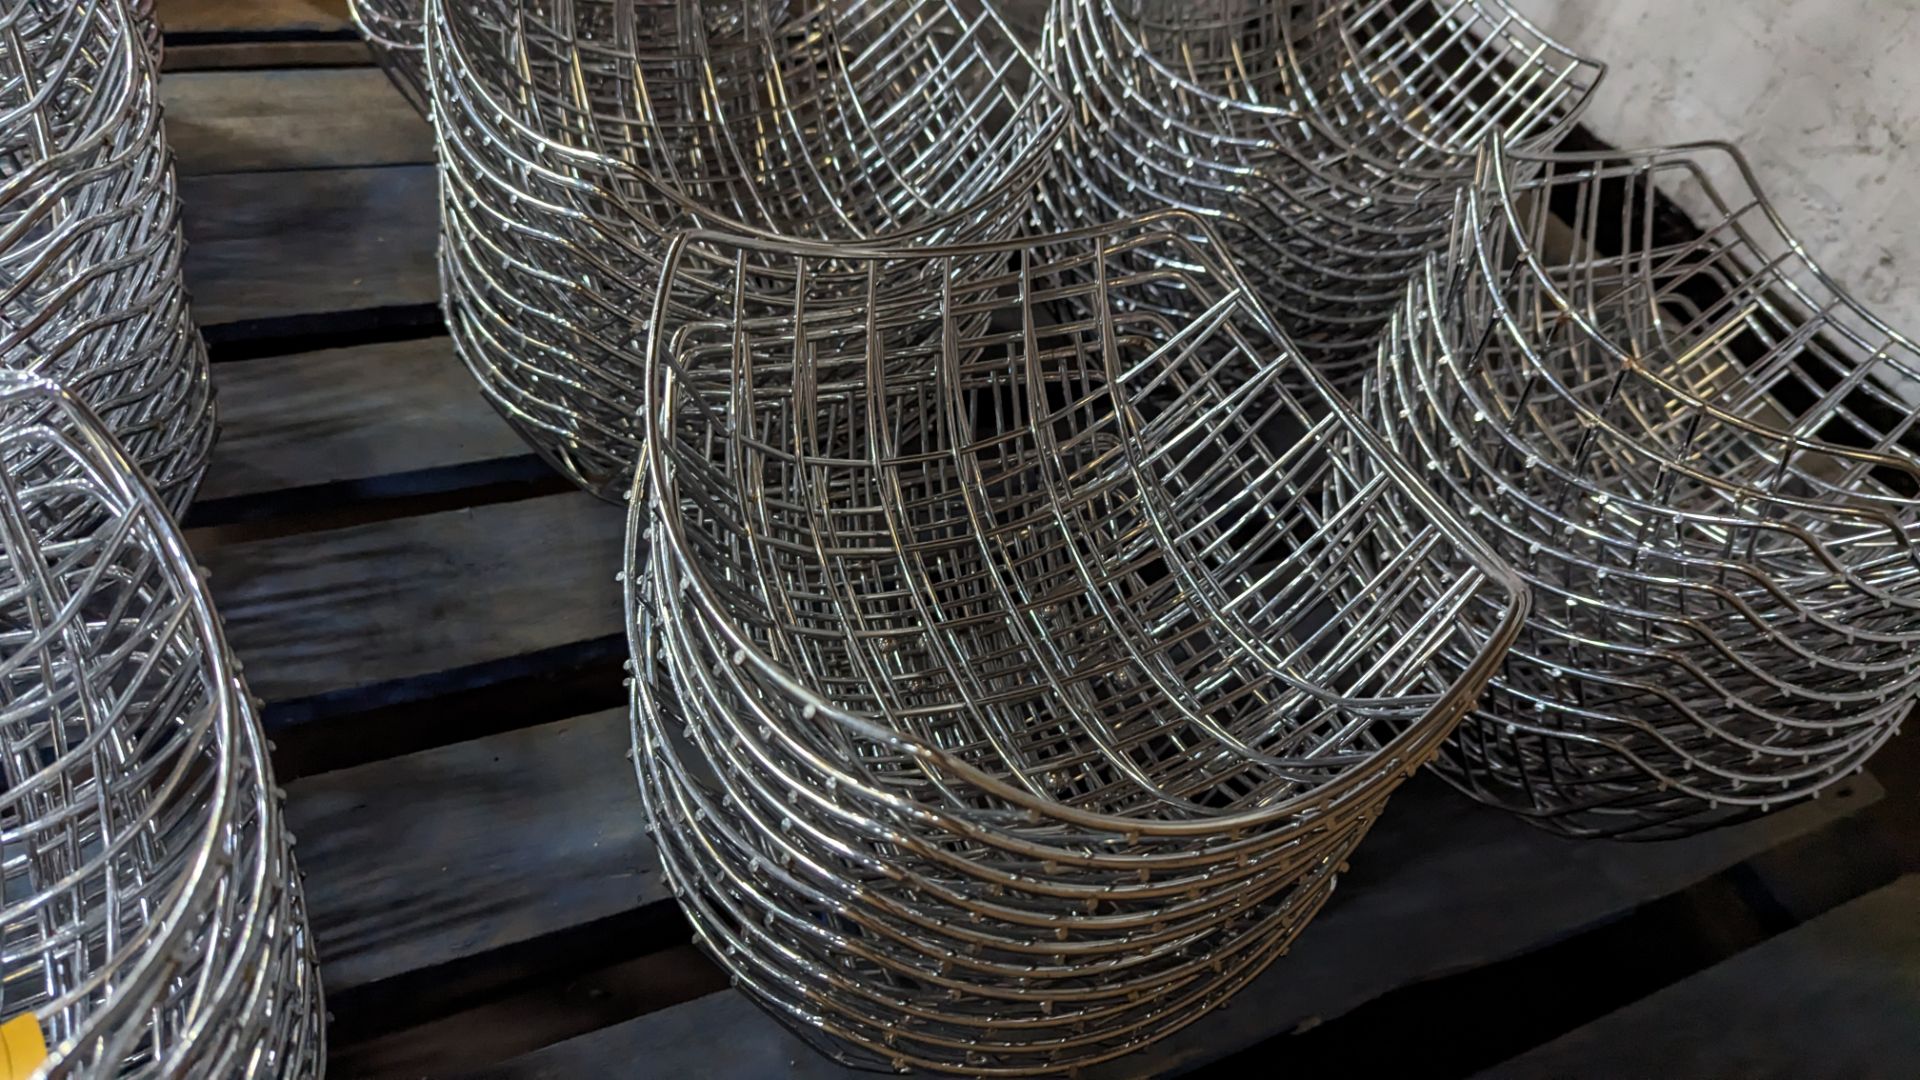 29 off chrome wire baskets each measuring approximately 240mm square - 3 stacks - Image 4 of 5